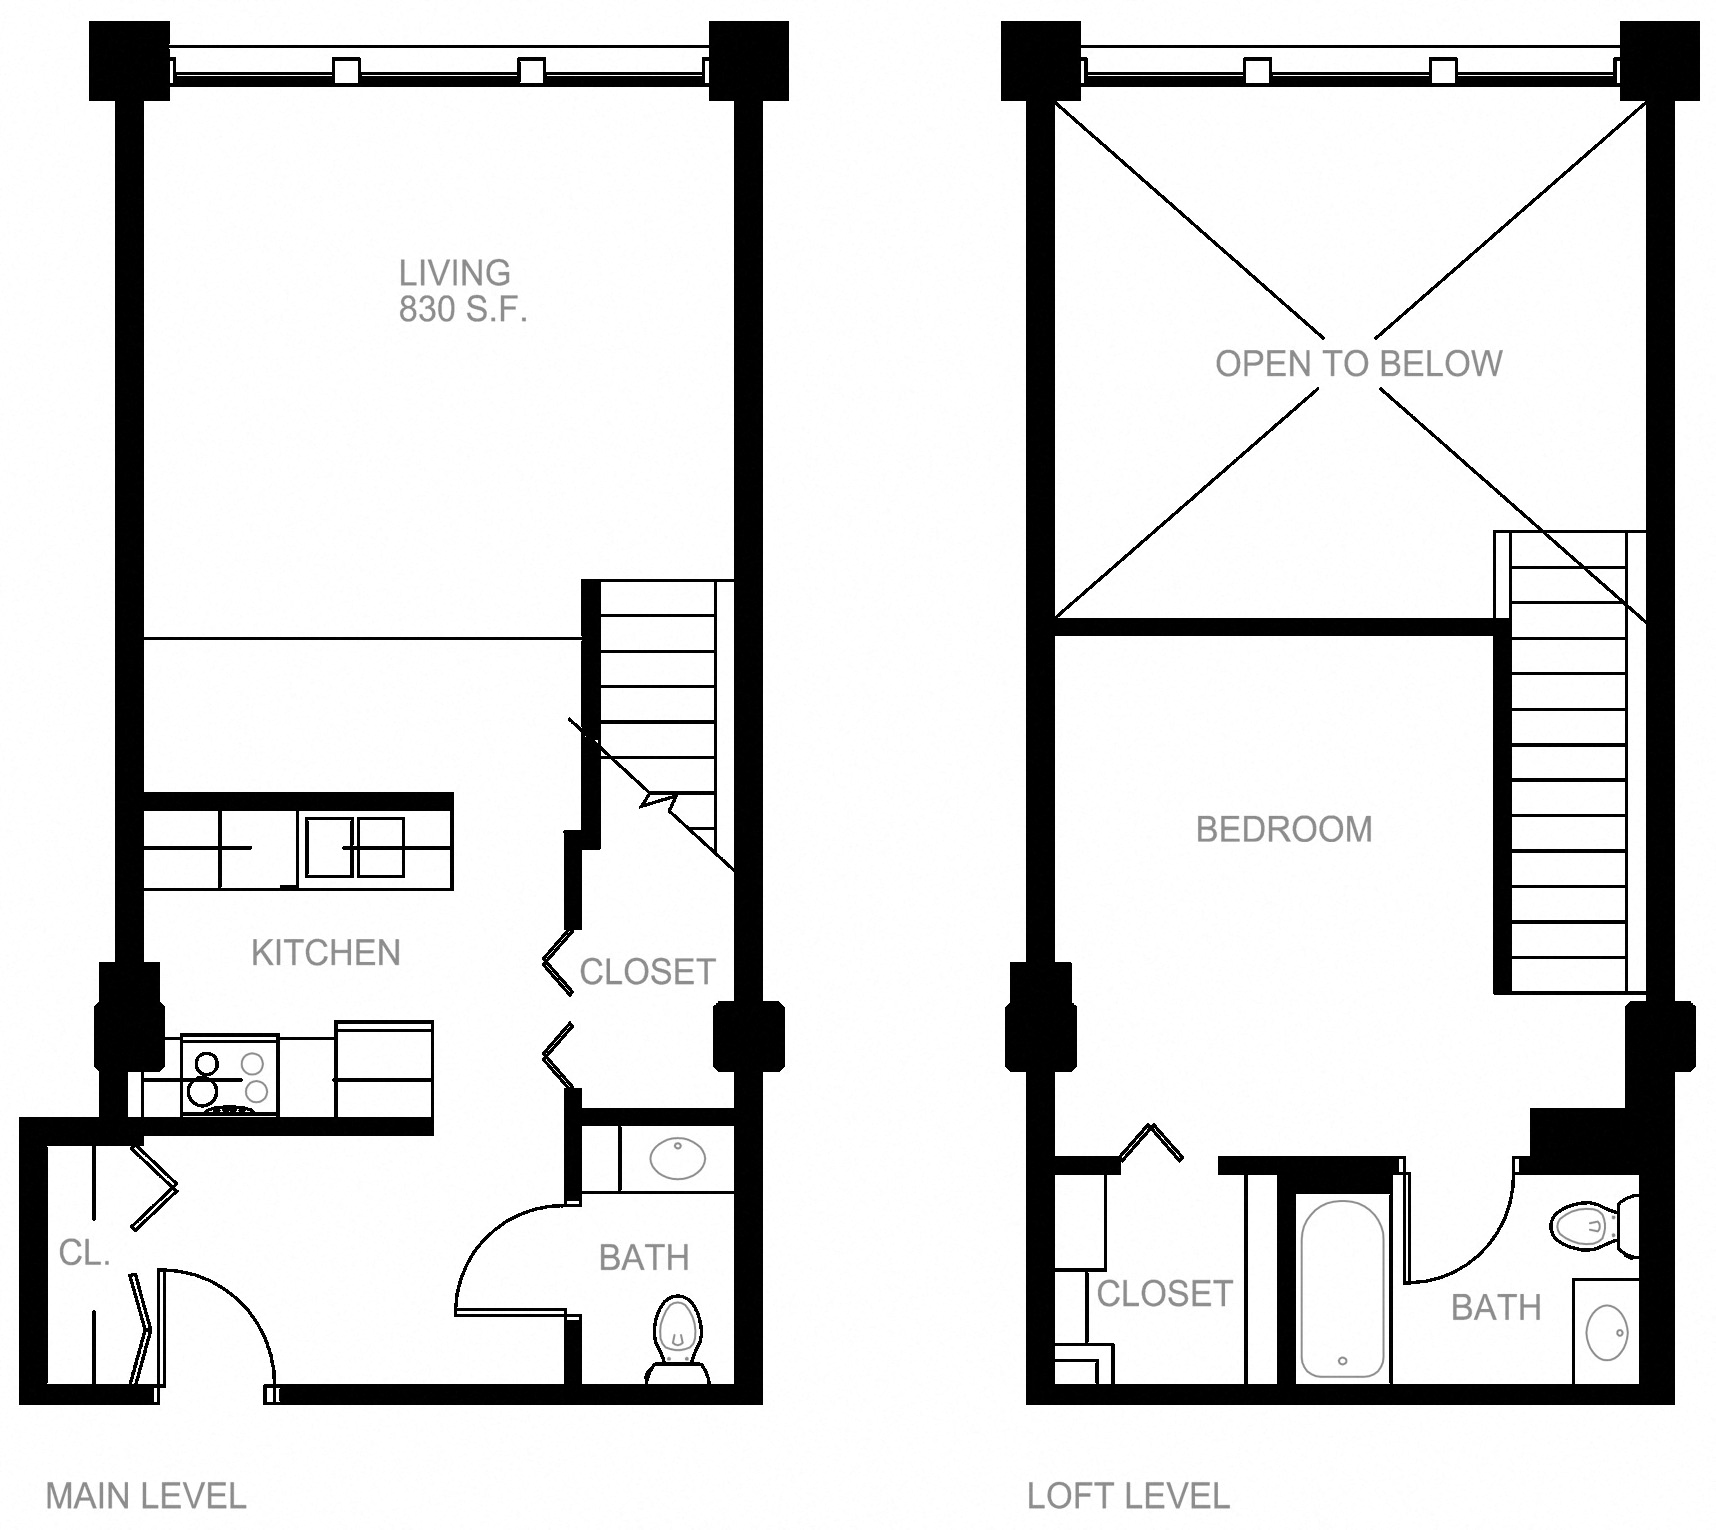 Floorplan for Apartment #P123, 1 bedroom unit at Halstead Providence